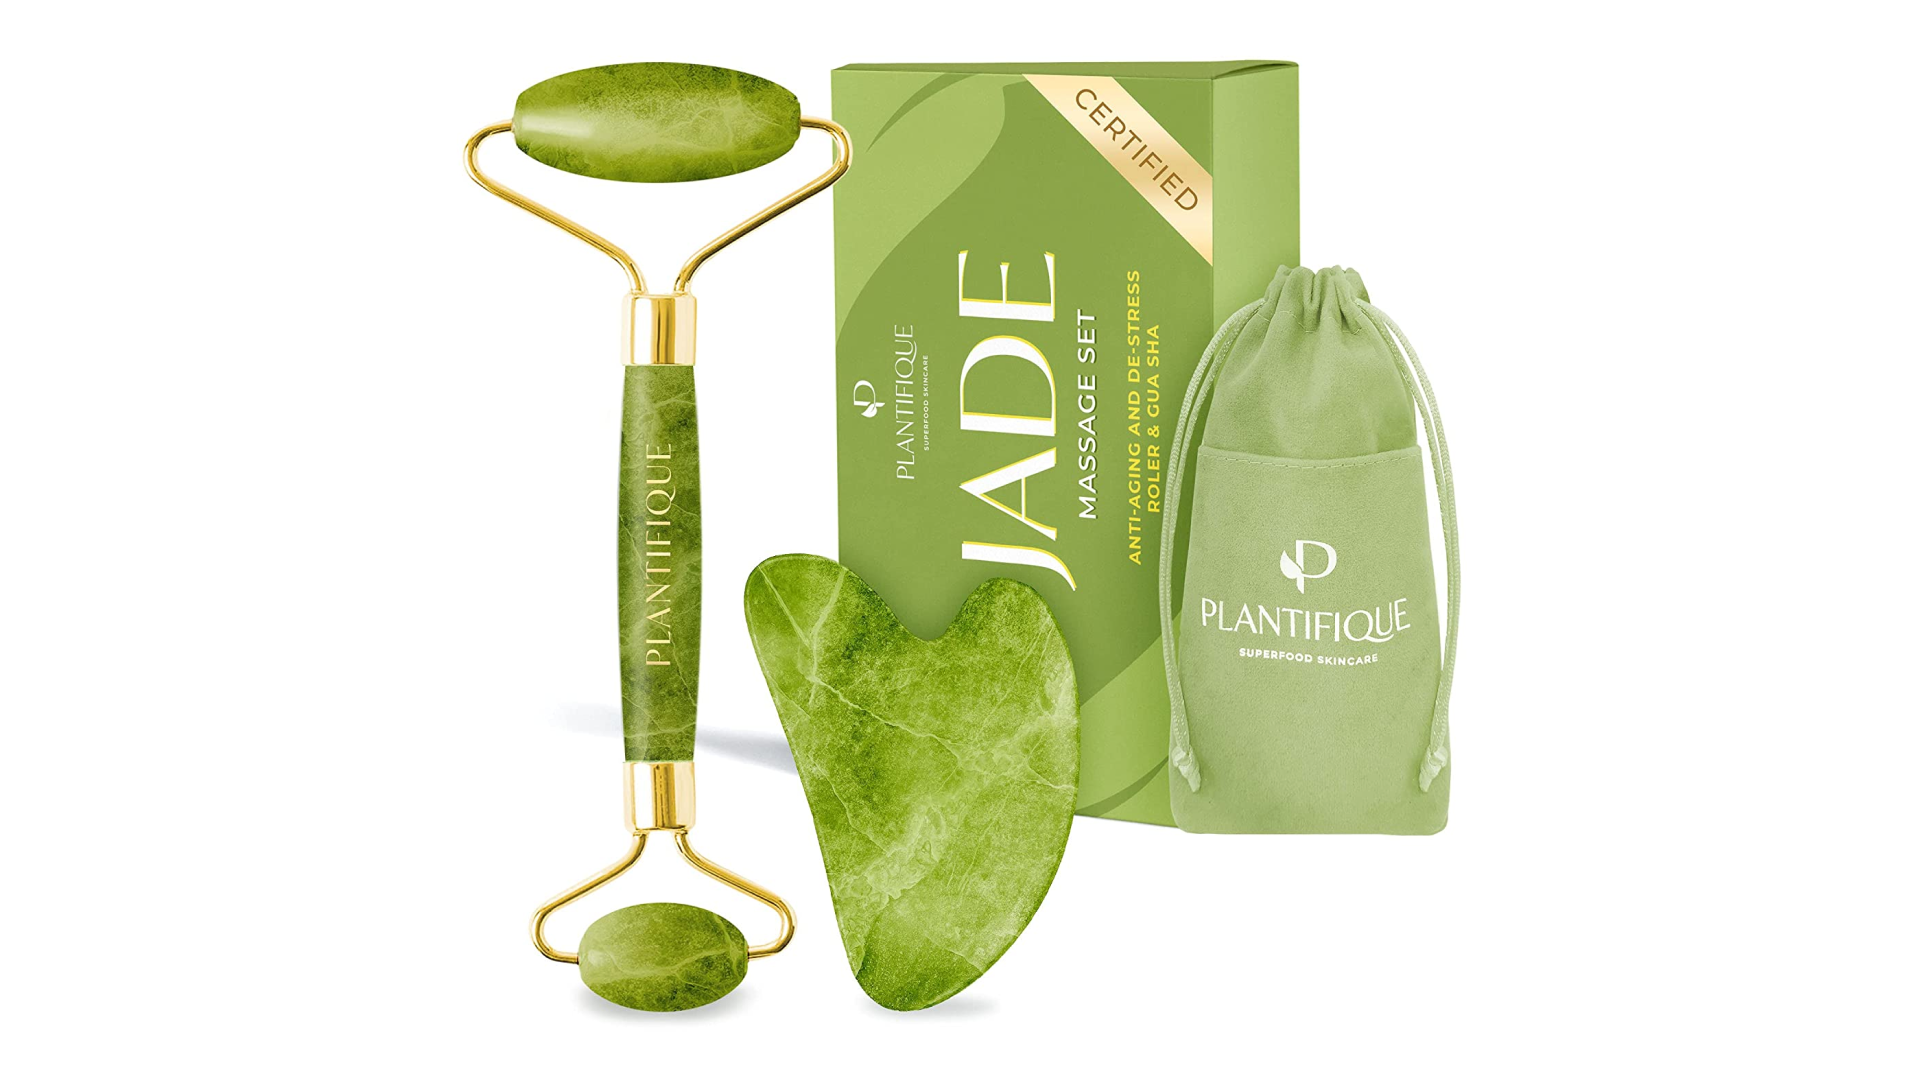 green jade roller and gua sha tool set to massage your face with, can help with puffiness under eyes